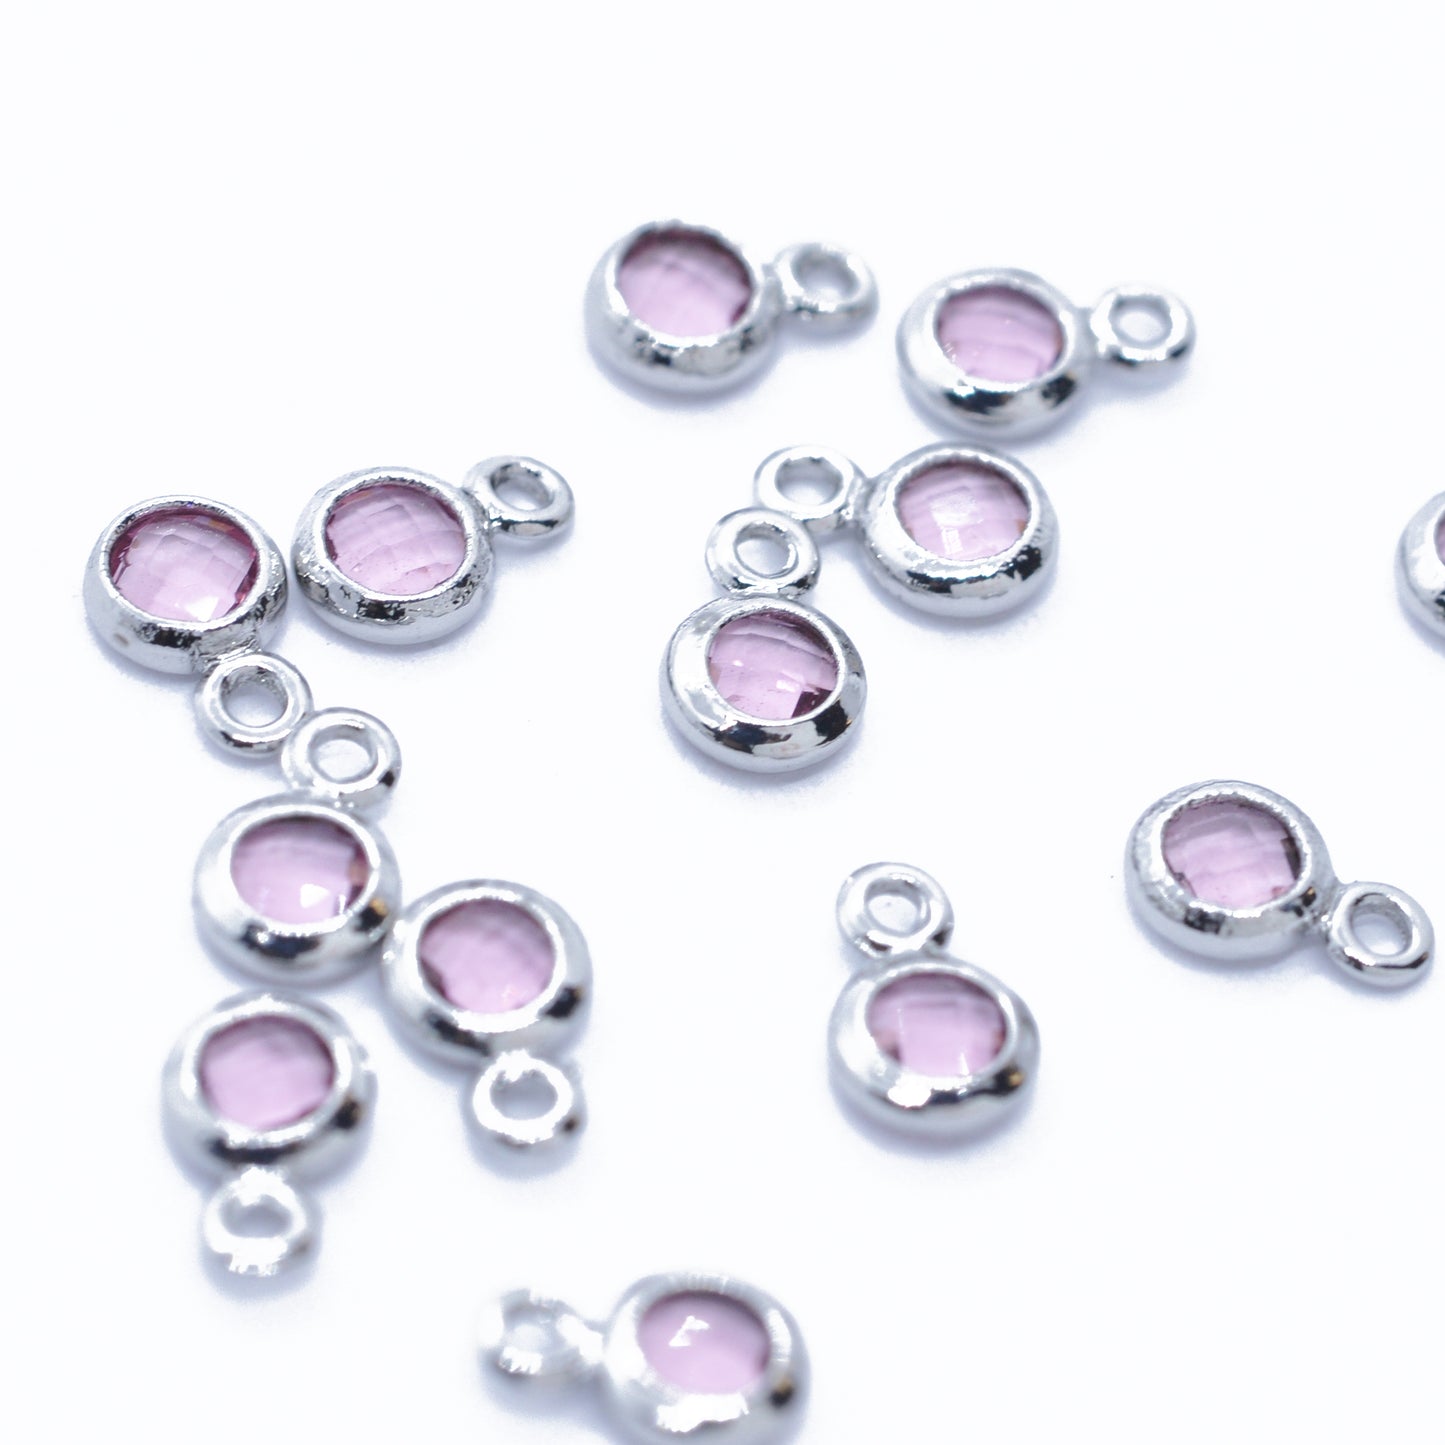 Mini crystal pendant pink / silver colored / Ø 4 mm